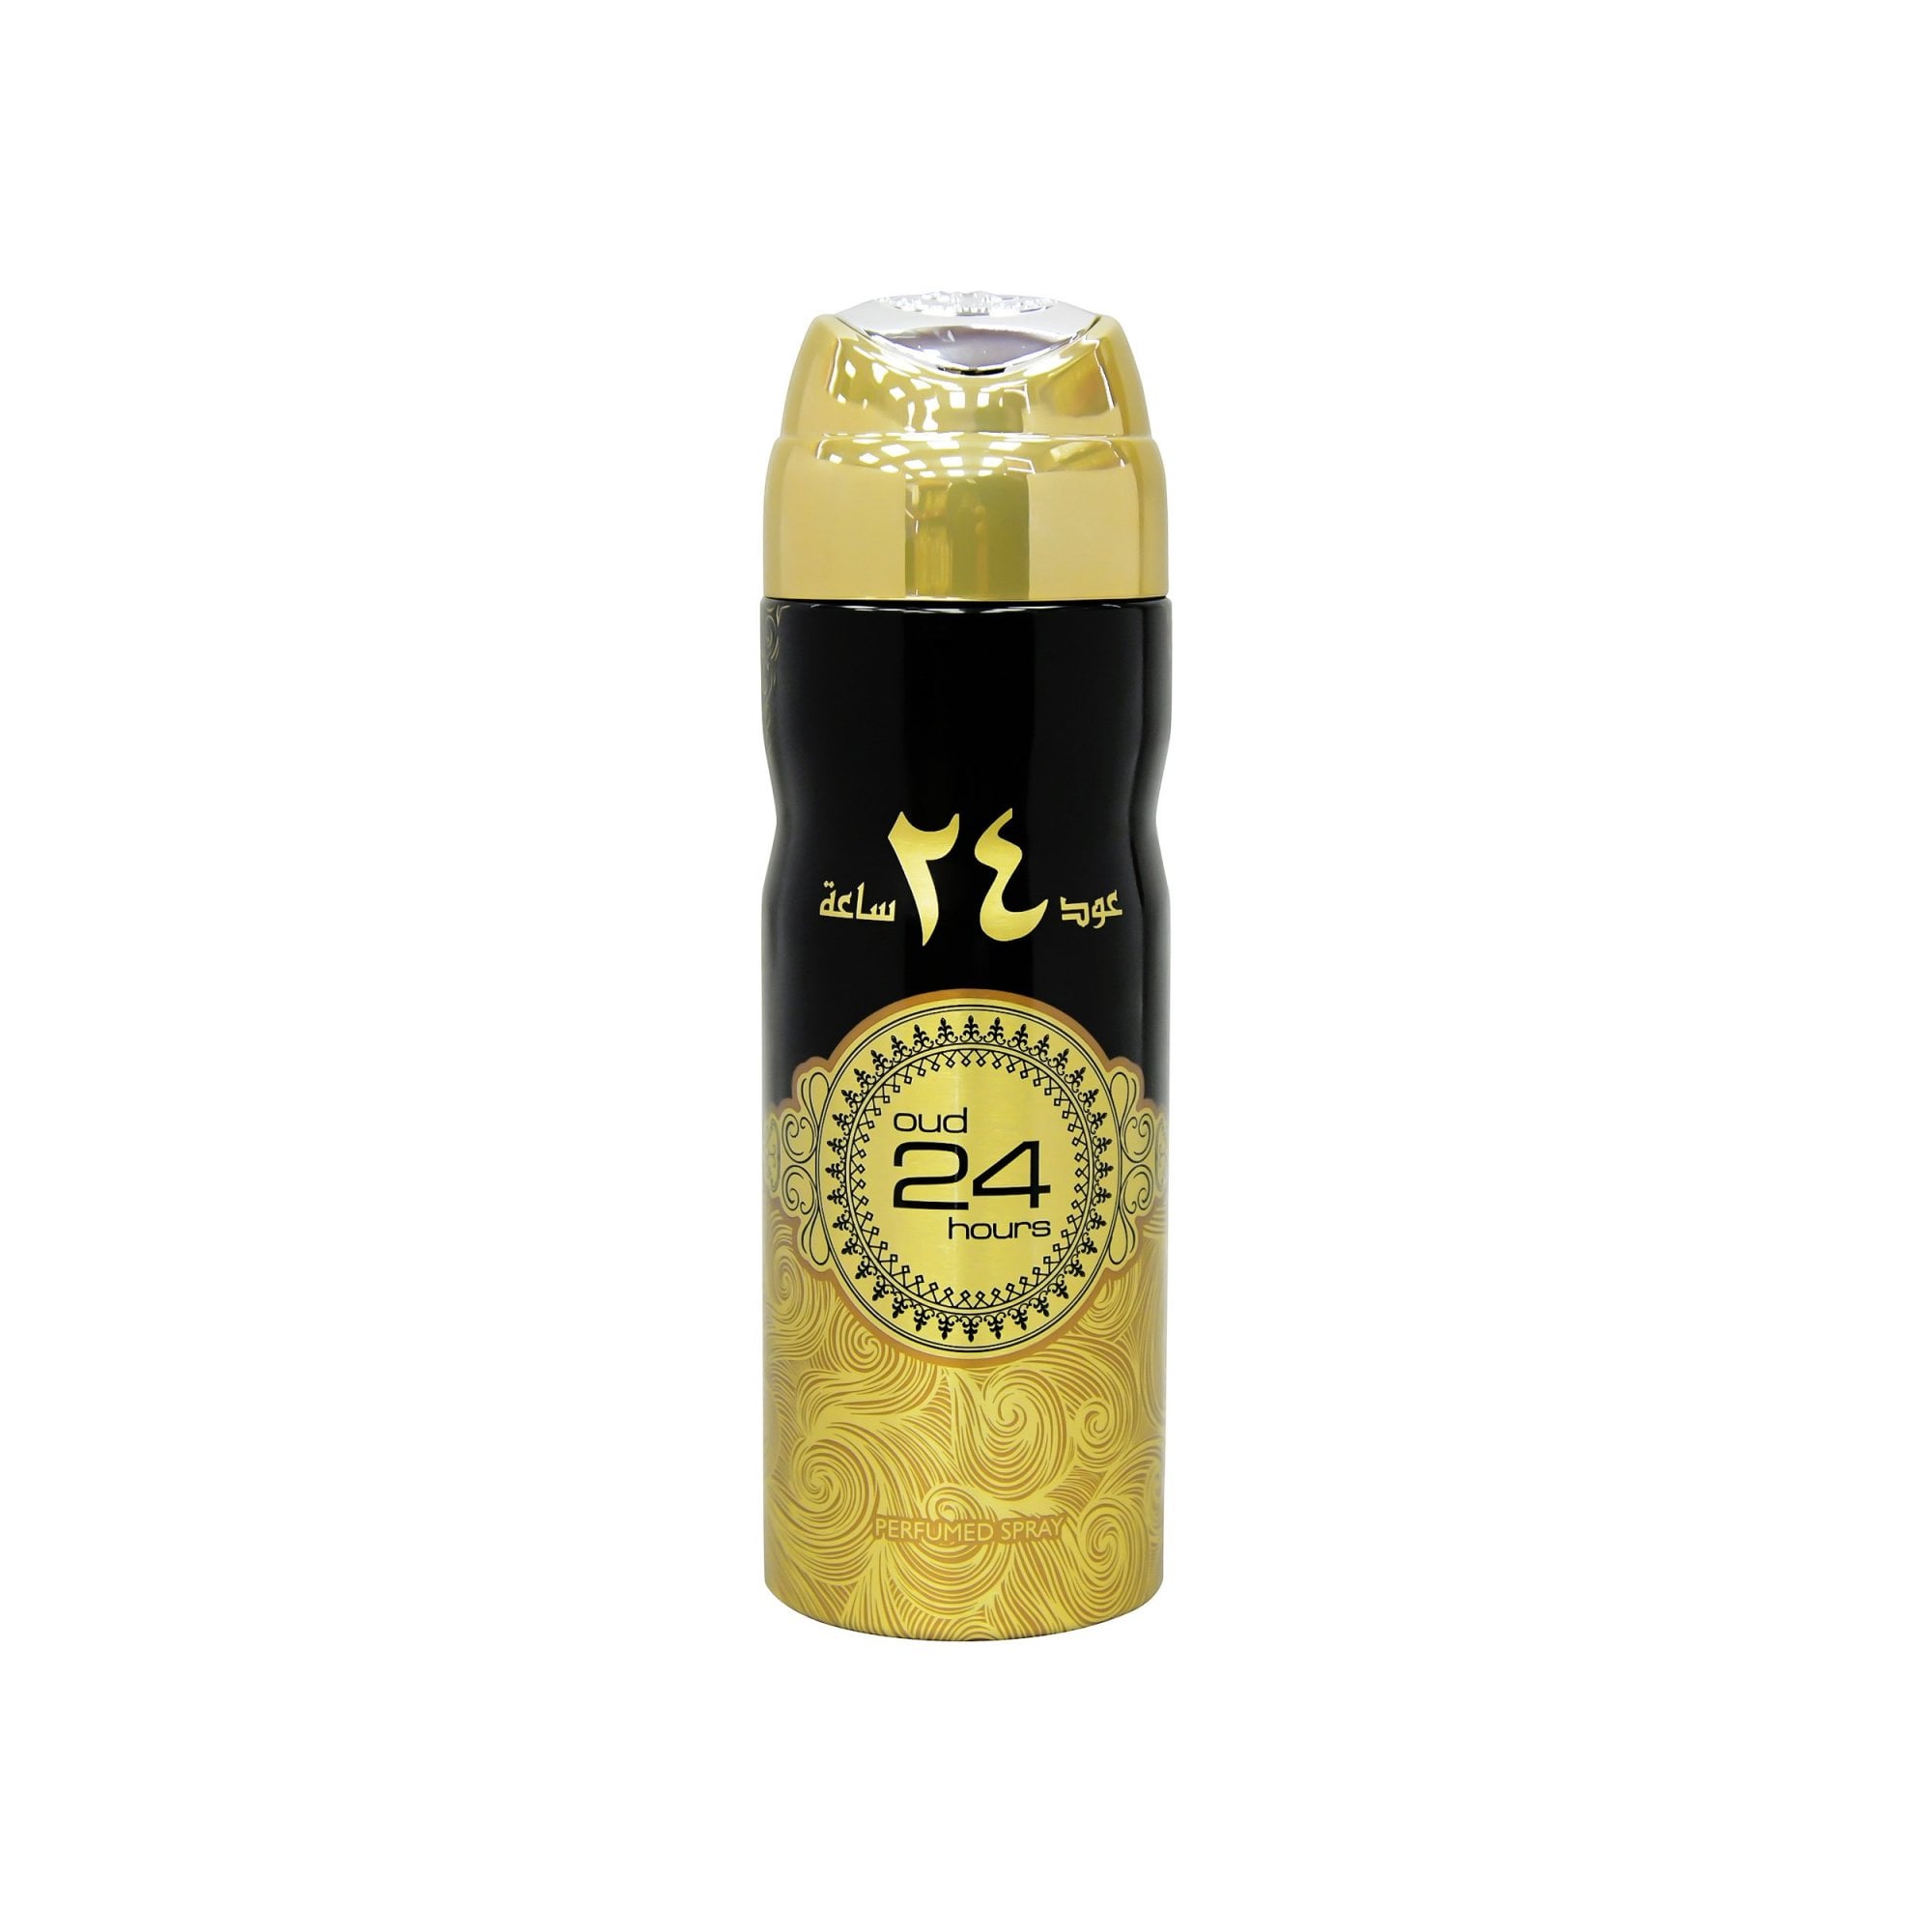 The image displays a bottle of "oud 24 hours" perfumed deodorant spray. The bottle is primarily black with a gold cap and a decorative gold label that wraps around the lower portion. The label has intricate, circular golden patterns and the product name "oud 24 hours" prominently displayed in the center within a decorative border. Below the name, in smaller letters, are the words "GOLD SPRAY PERFUMED SPRAY."